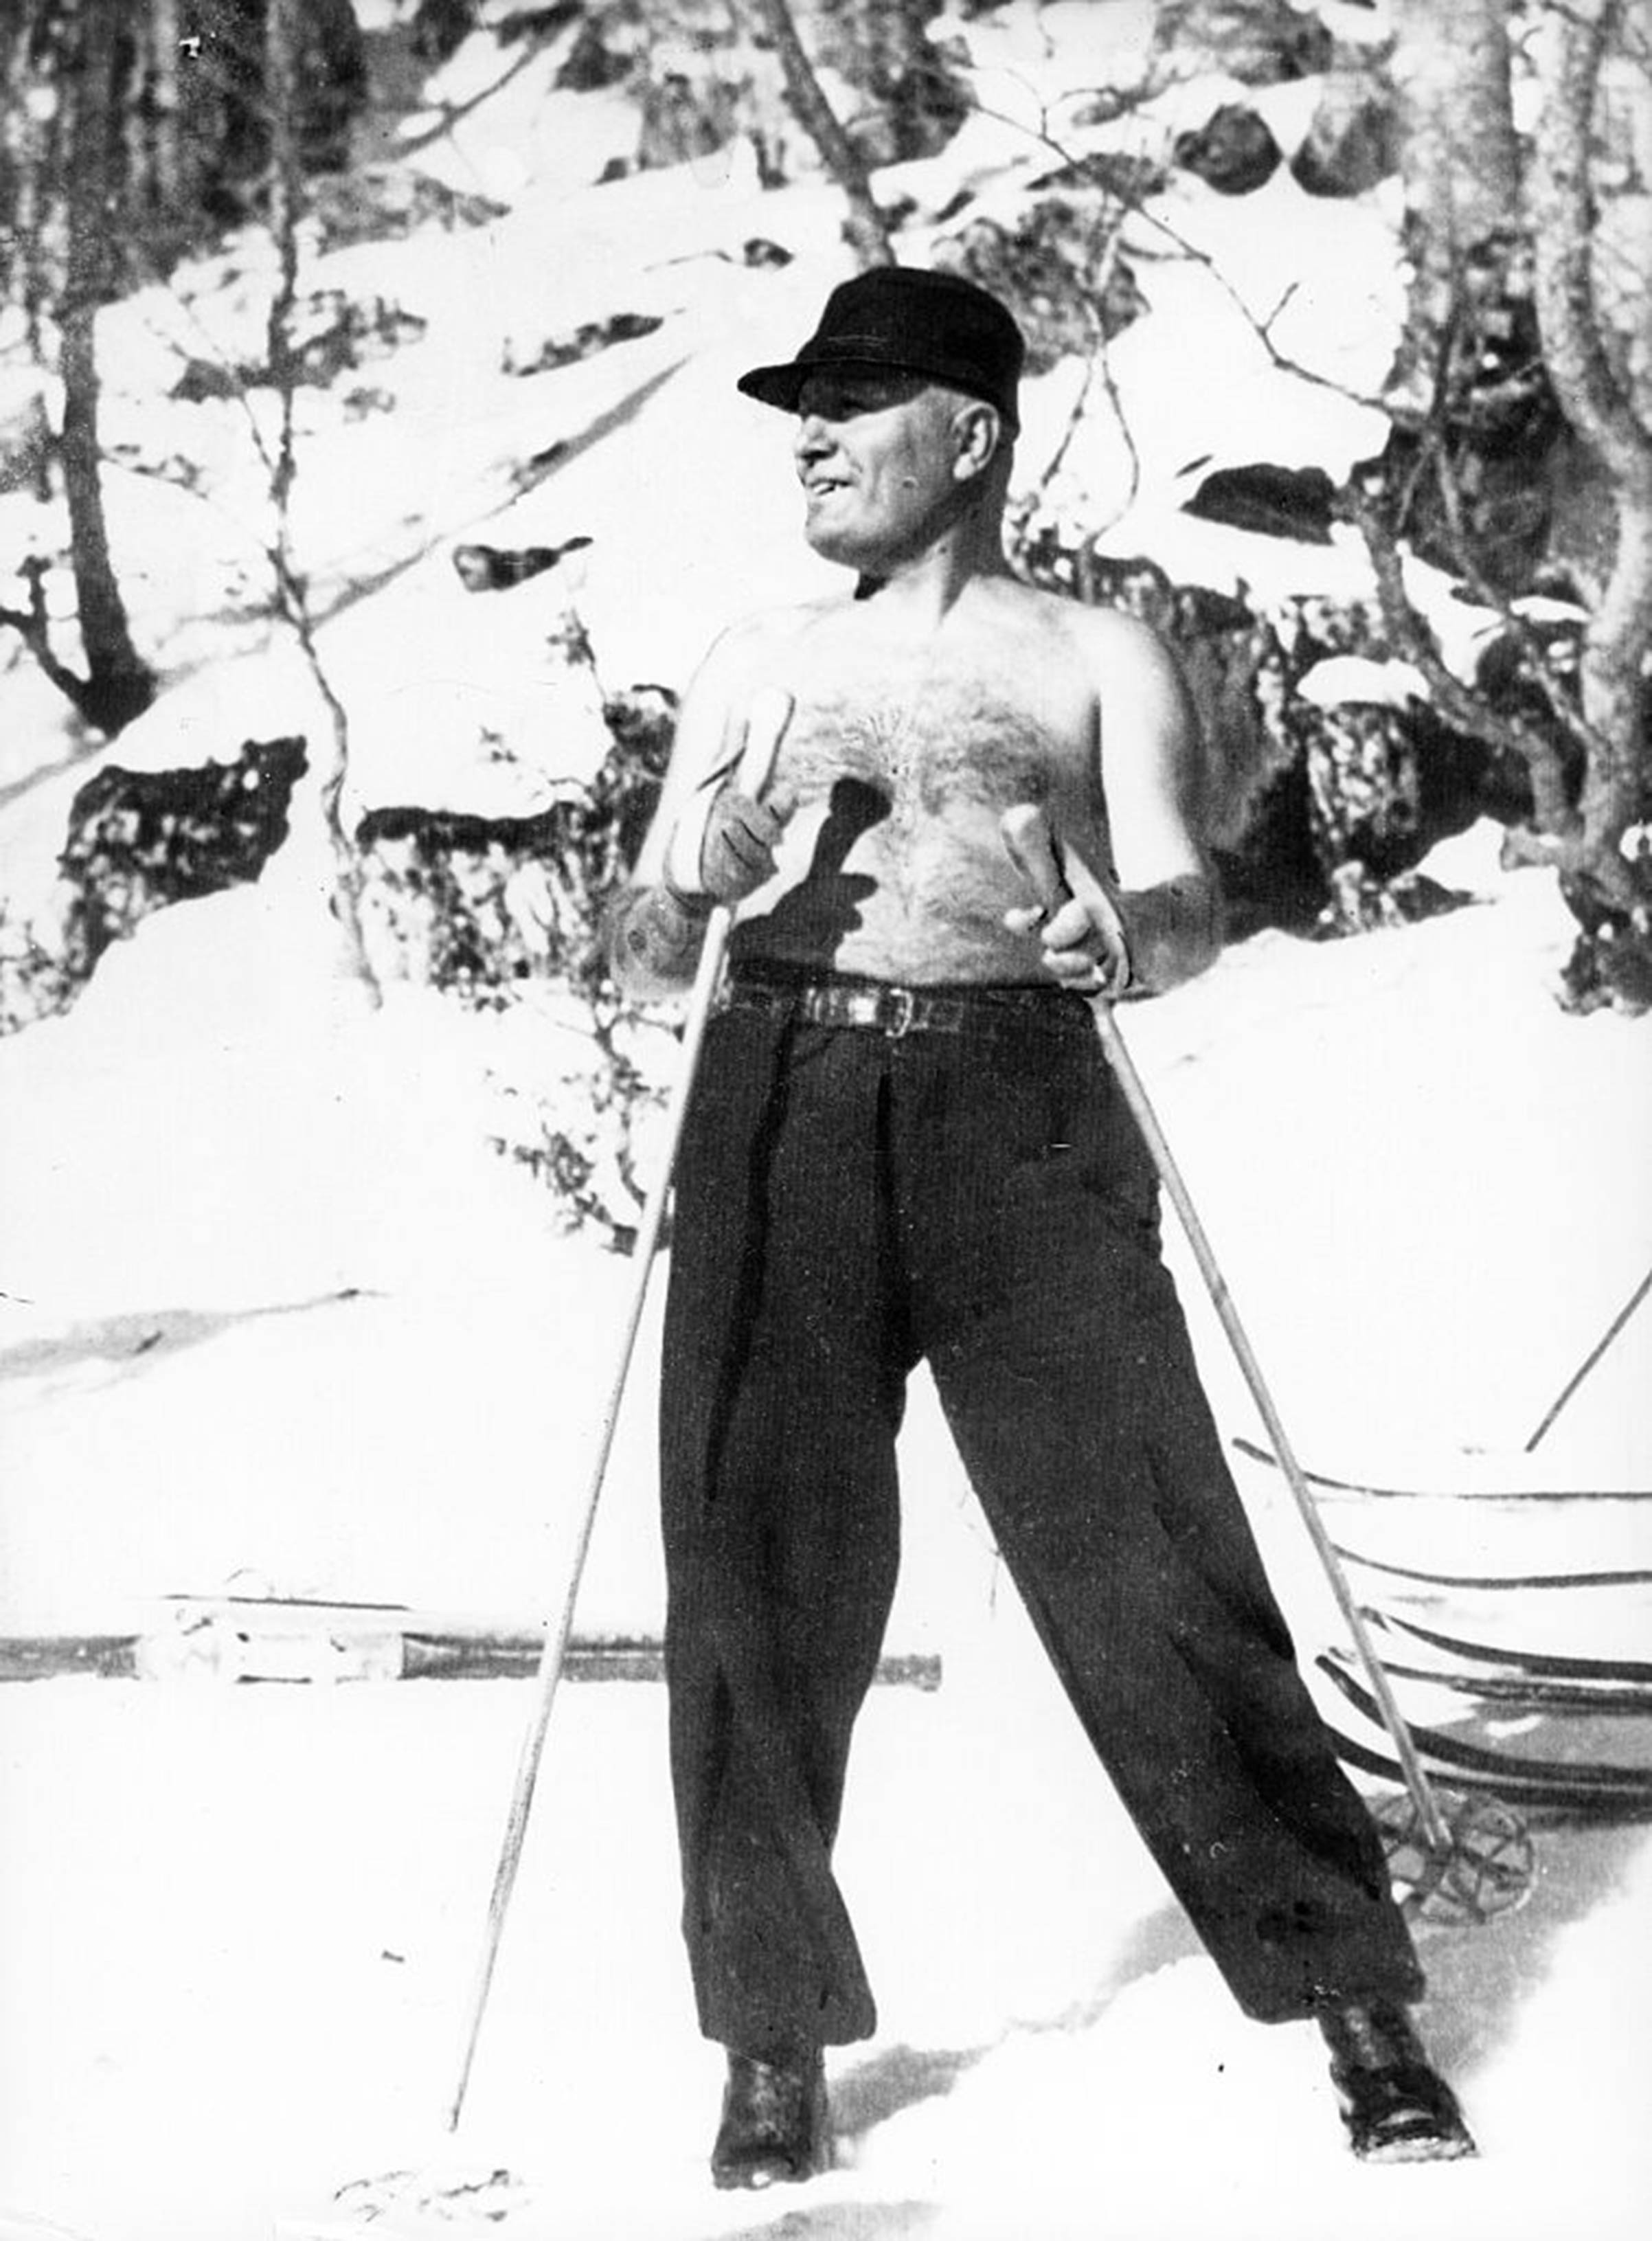 Italian fascist dictator Benito Mussolini strikes a pose while skiing in Italy with his son in 1937. (ullstein bild—Getty Images)